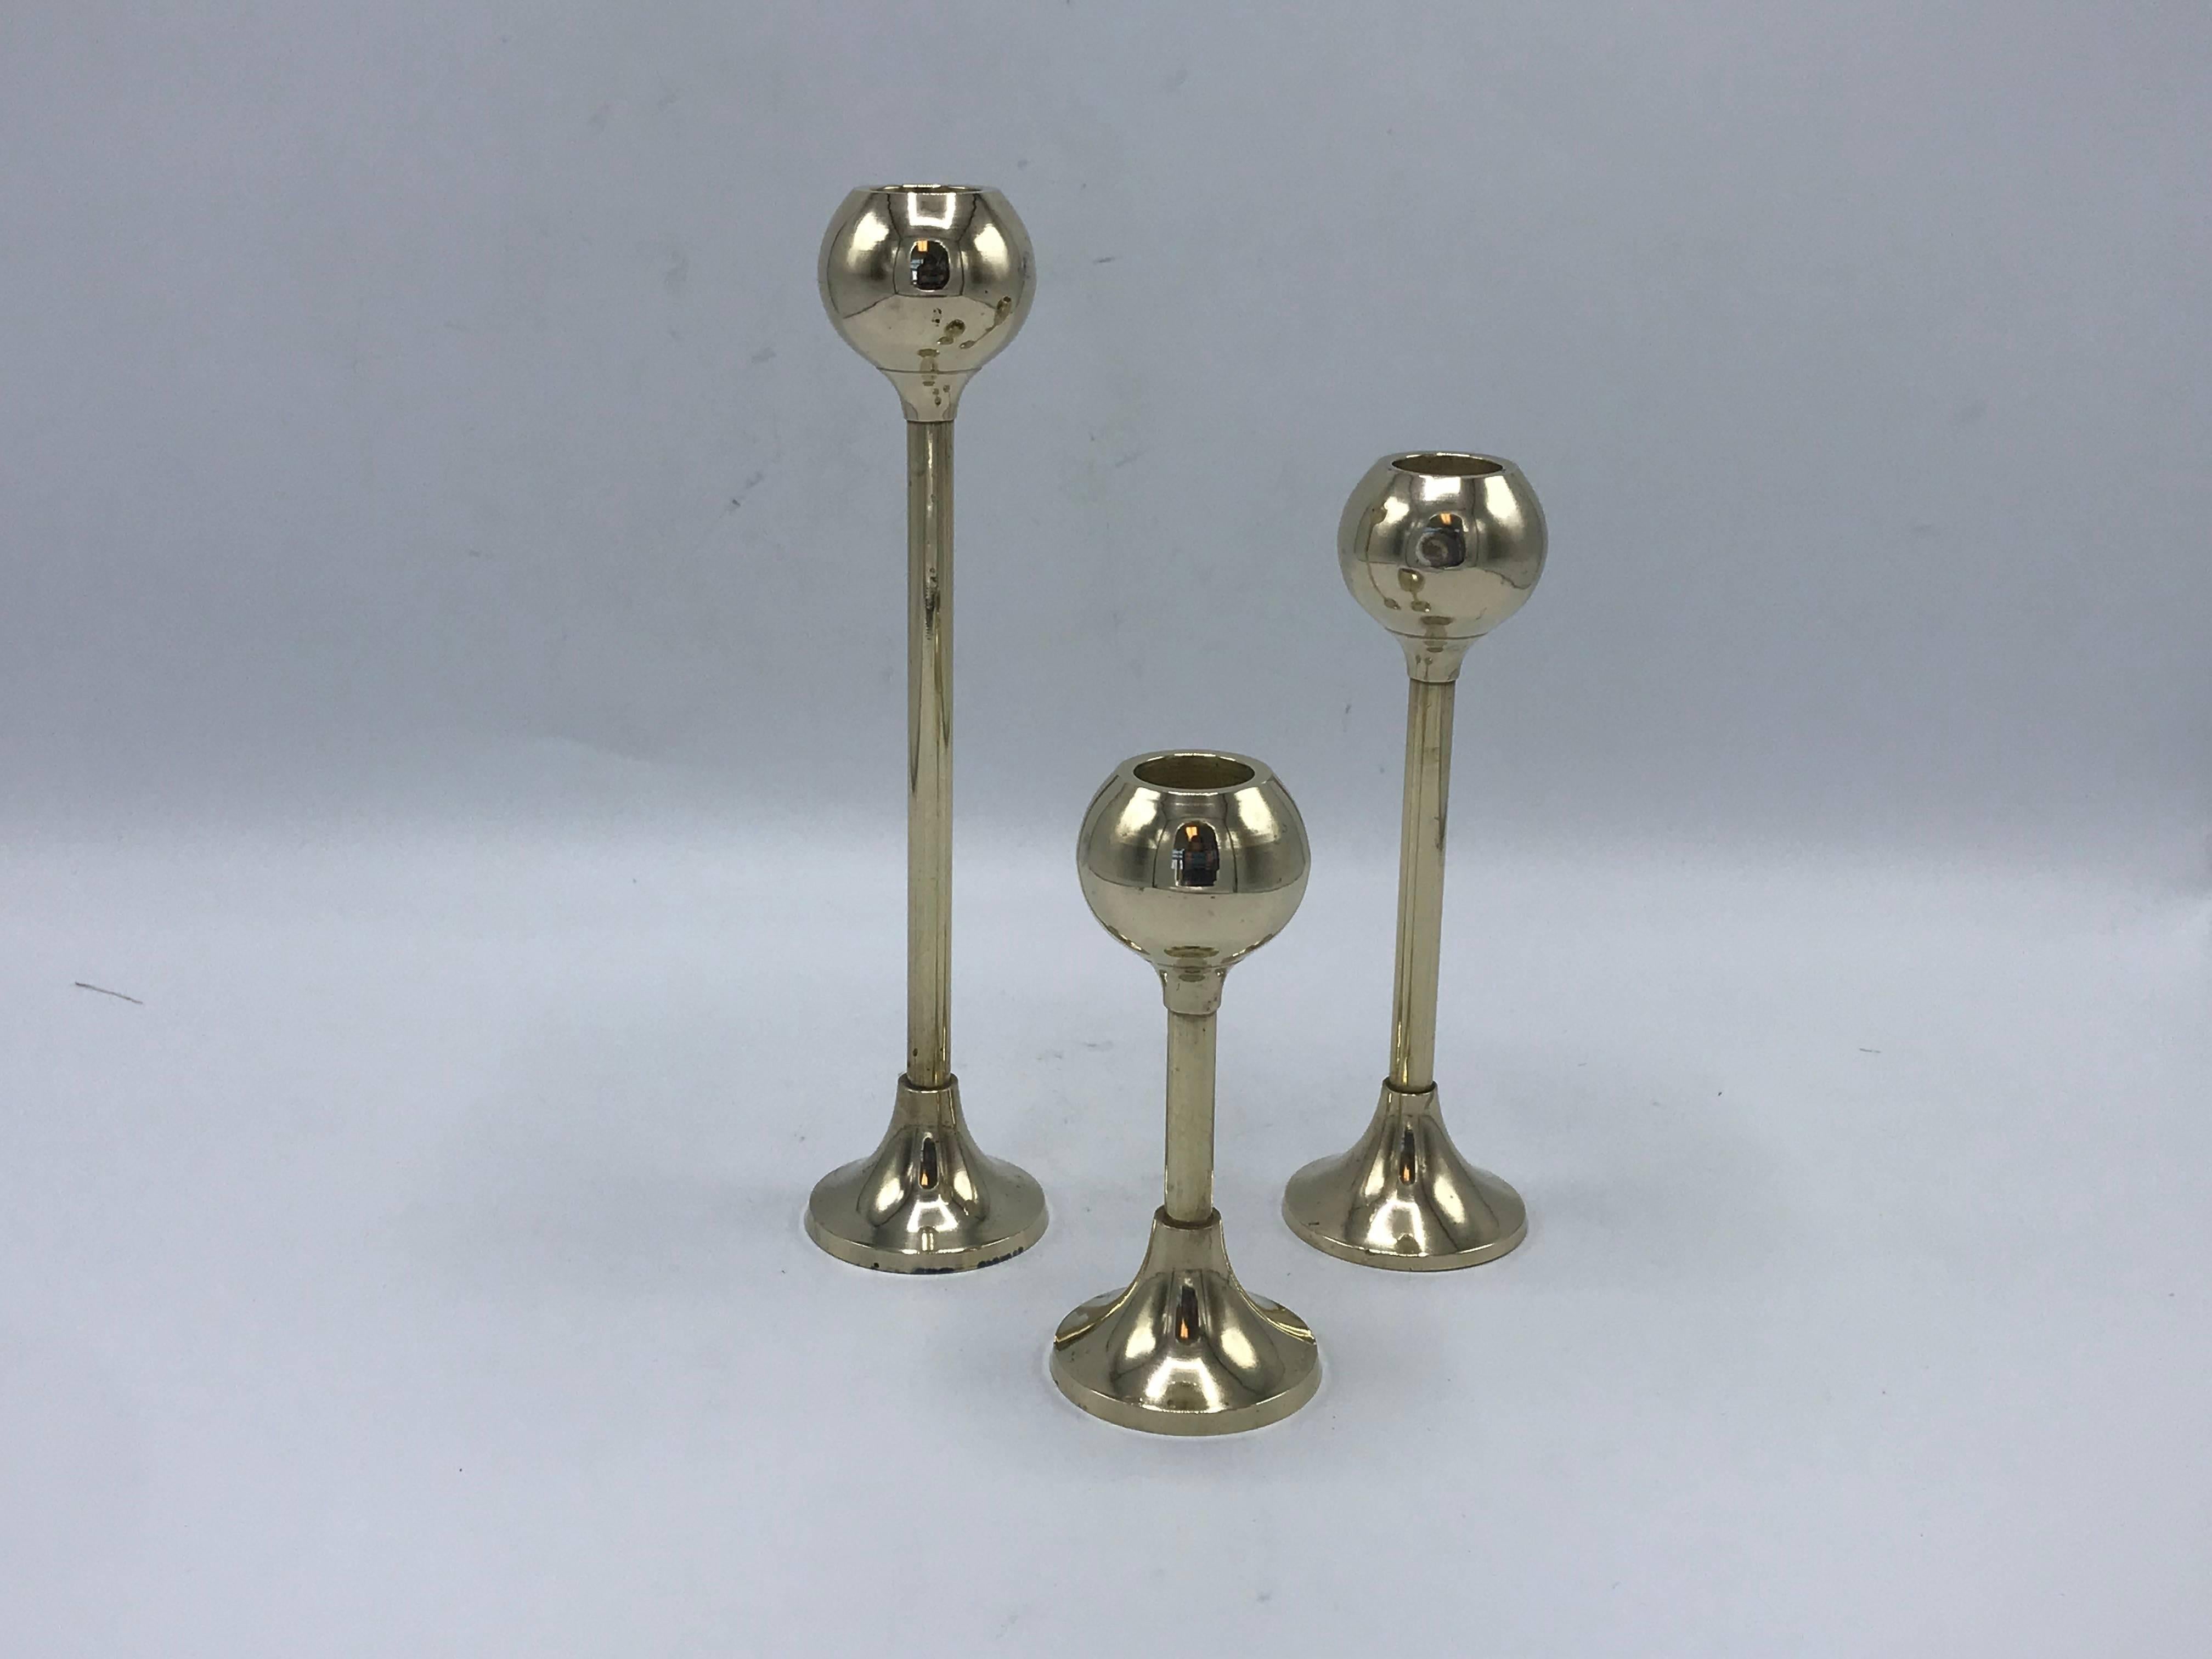 Listed is a gorgeous, set of three, 1970s Italian brass candlesticks with a modern floating orb. The set has been heavily polished, giving a mirrored brass effect. When not polished, the set turns a beautiful, warm brass patina. 

Large: 2